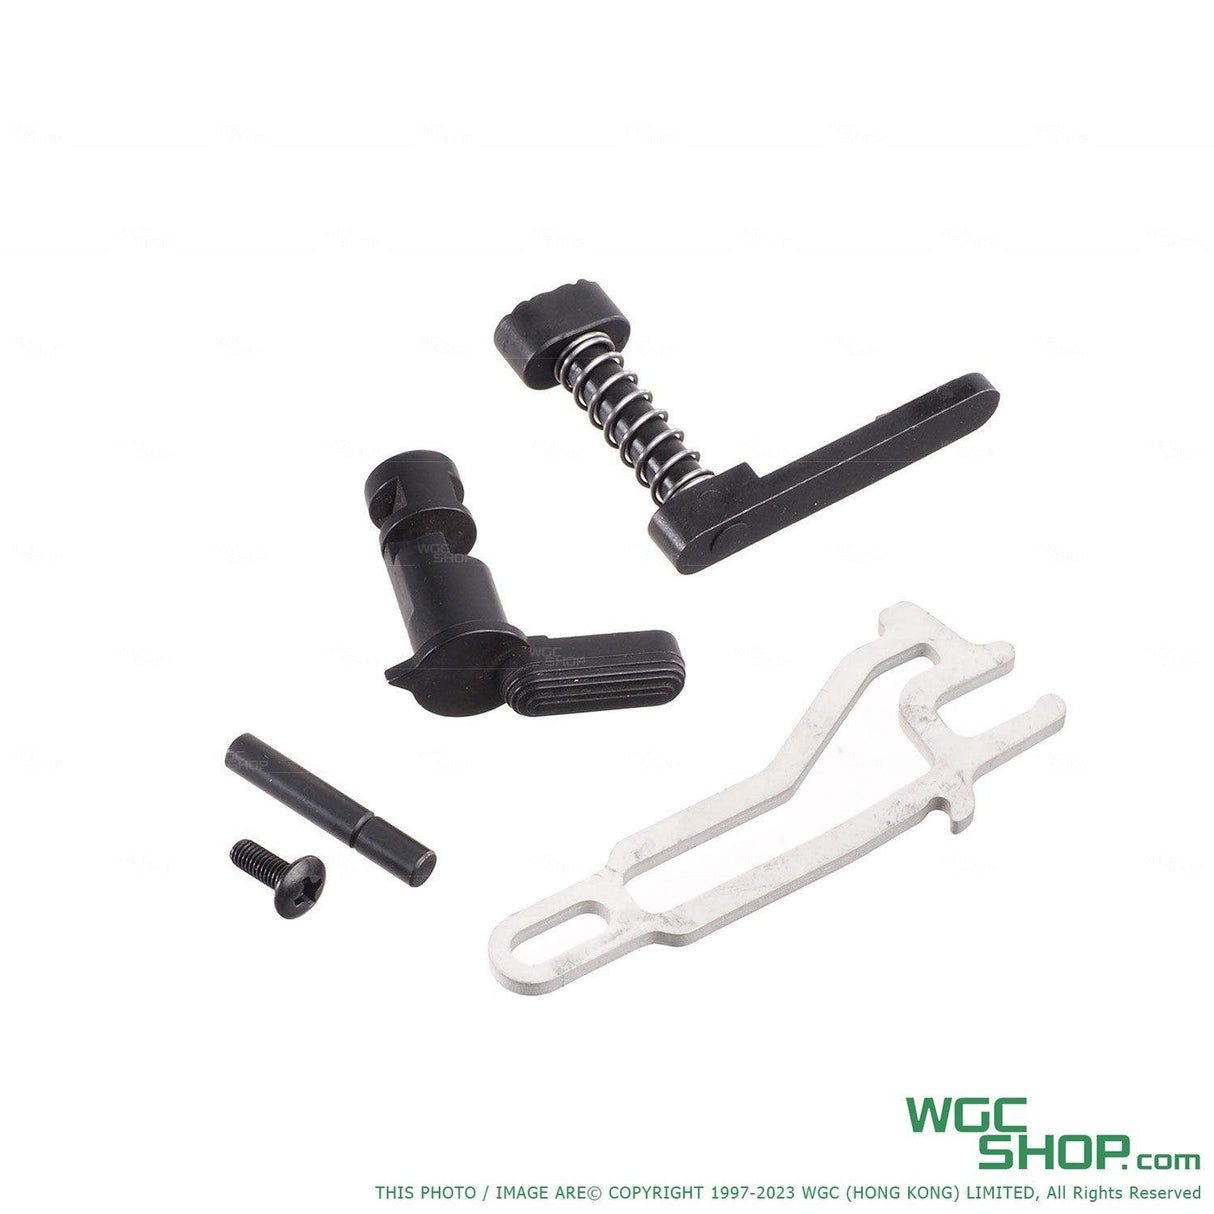 ANGRY GUN MWS Stainless Steel Drop-in Trigger Set With Lower Build Kits - WGC Shop